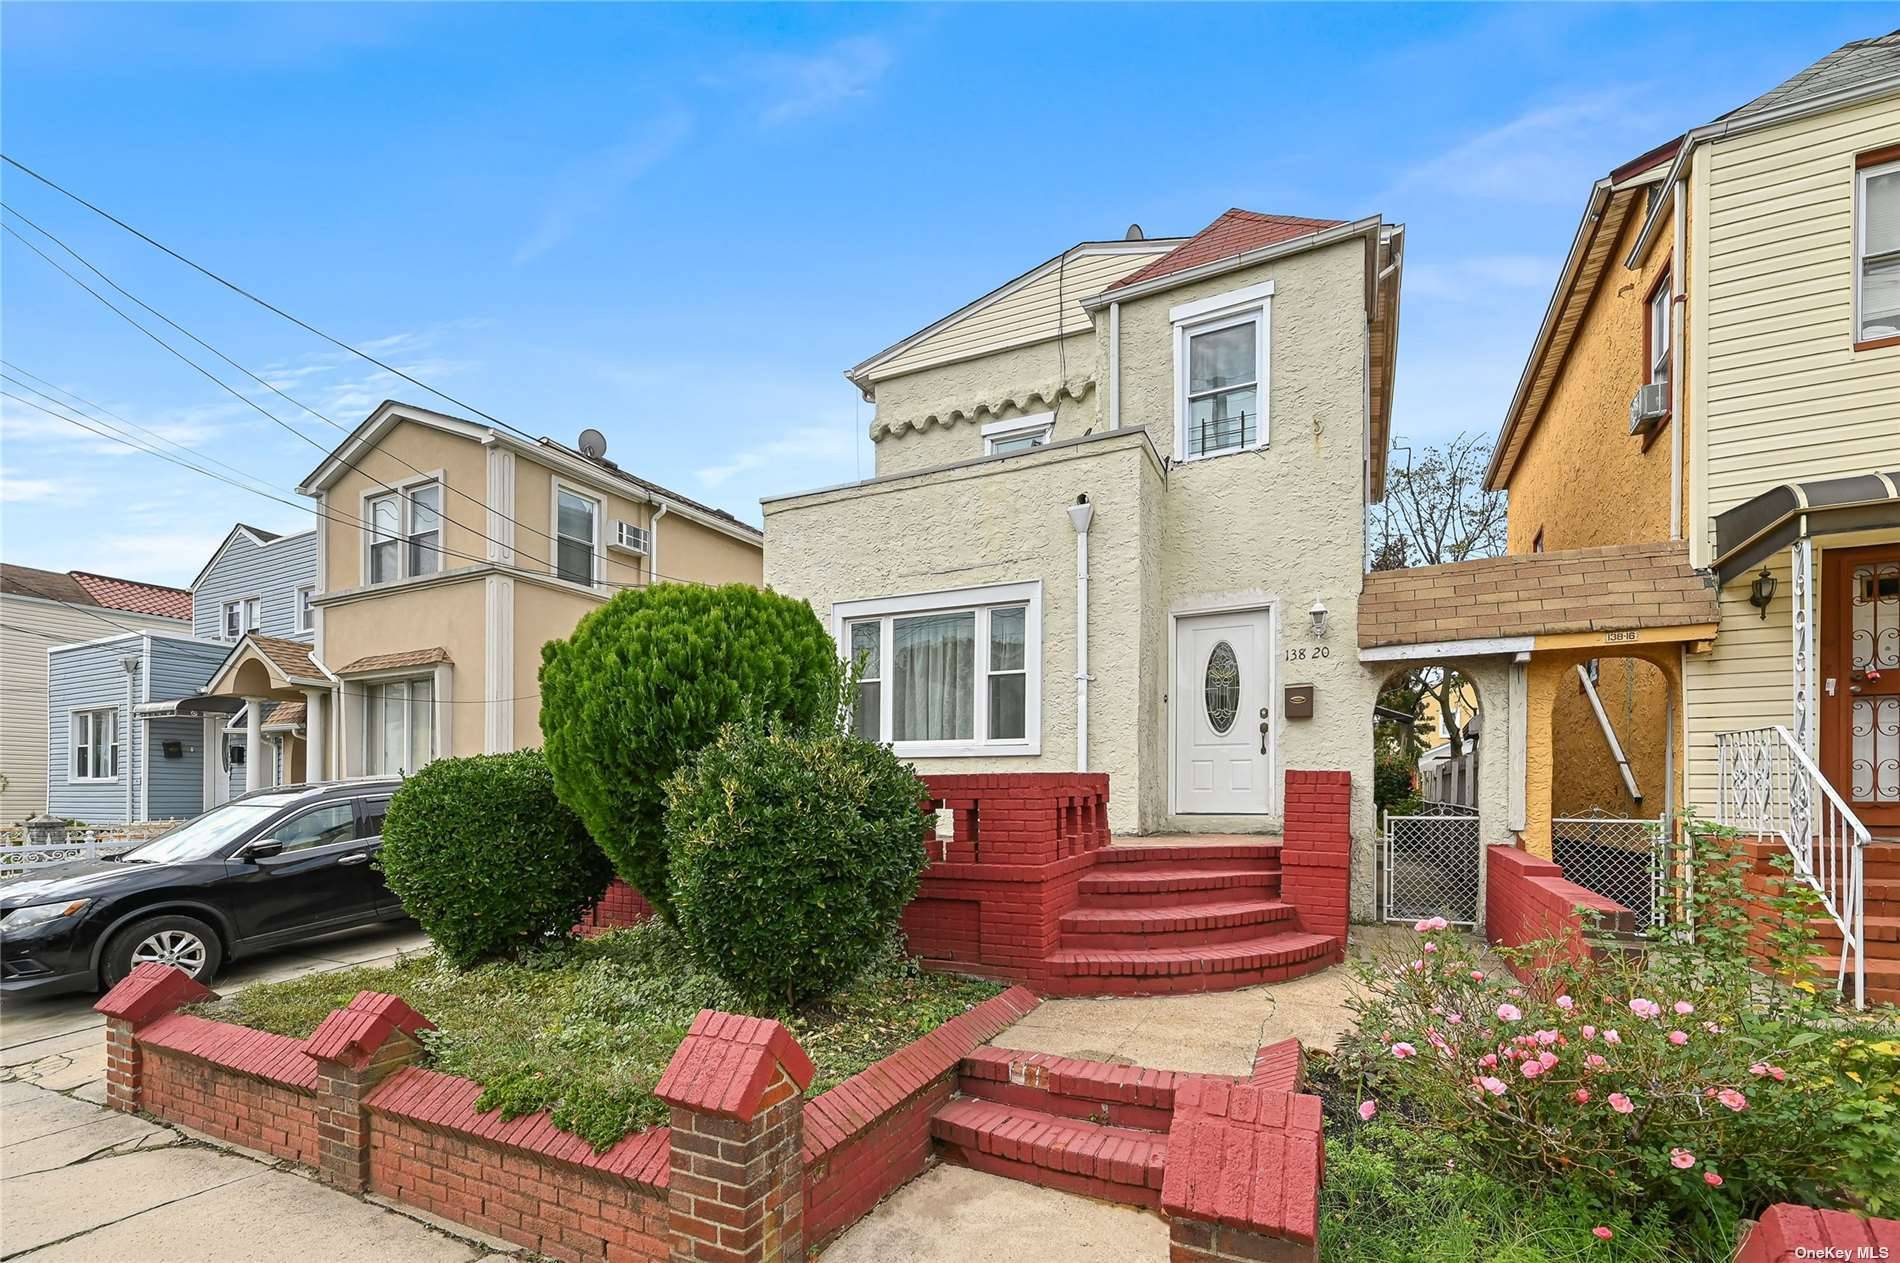 Unveiling a potential gem at 233rd Street in Rosedale, this 3 bedroom, 2.